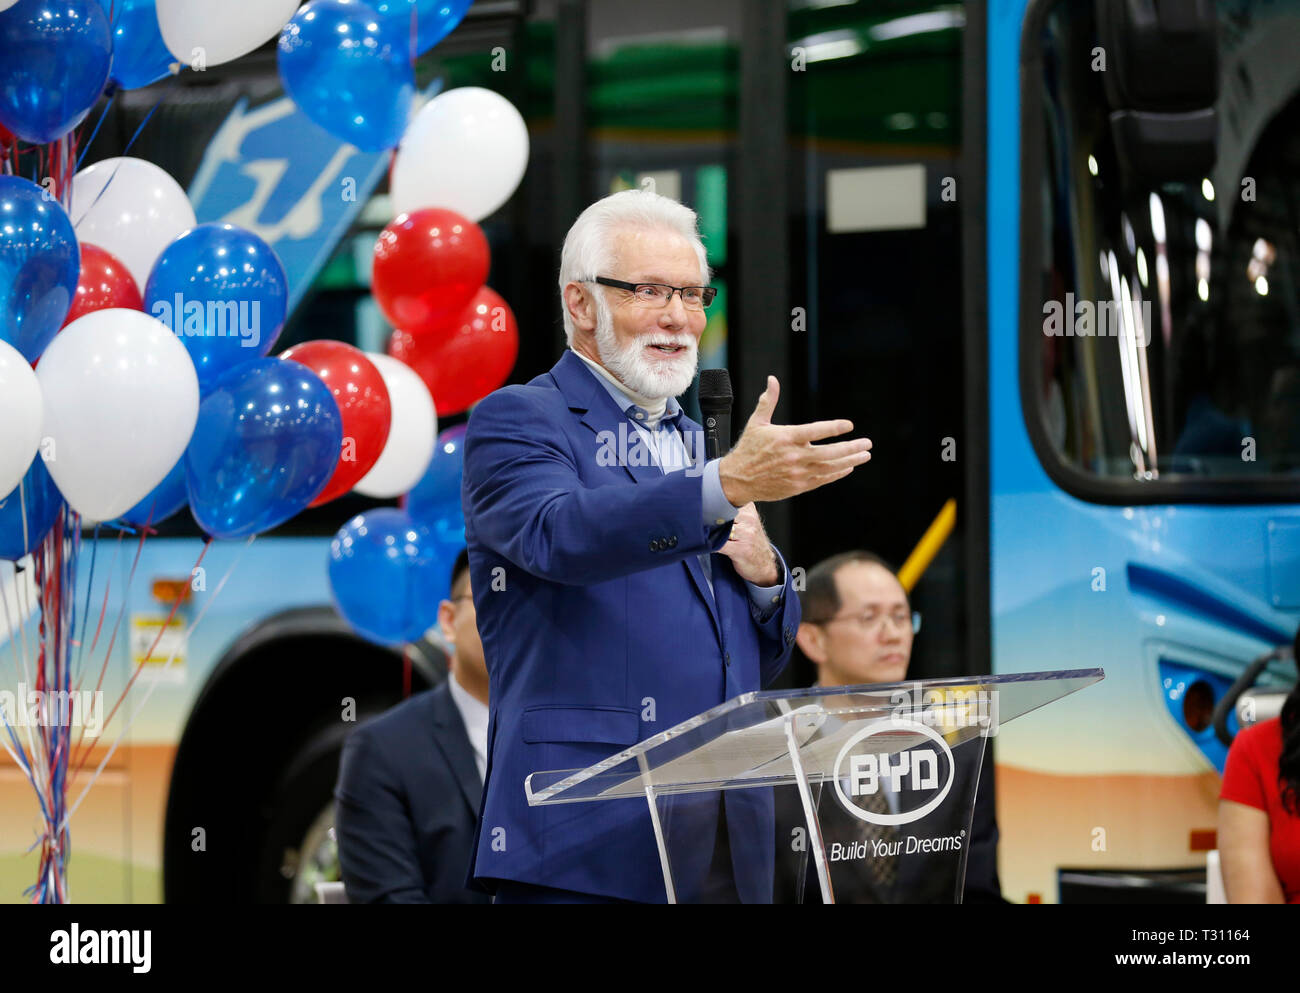 (190405) -- NEW YORK, April 5, 2019 (Xinhua) -- Lancaster Mayor R. Rex Parris delivers a speech at the 300th BYD electric bus offline ceremony in Lancaster, Los Angeles County, the United States, April 3, 2019. China's leading electric vehicle maker BYD held a ceremony on April 3 to celebrate its 300th bus at its Lancaster manufacturing plant in the U.S. state of California, marking a milestone for production. The 300th bus, a 35-foot BYD K9S model transit bus, is one of three built for the Capital Area Transit System of Baton Rouge, capital of the U.S. state of Louisiana, the company said in  Stock Photo